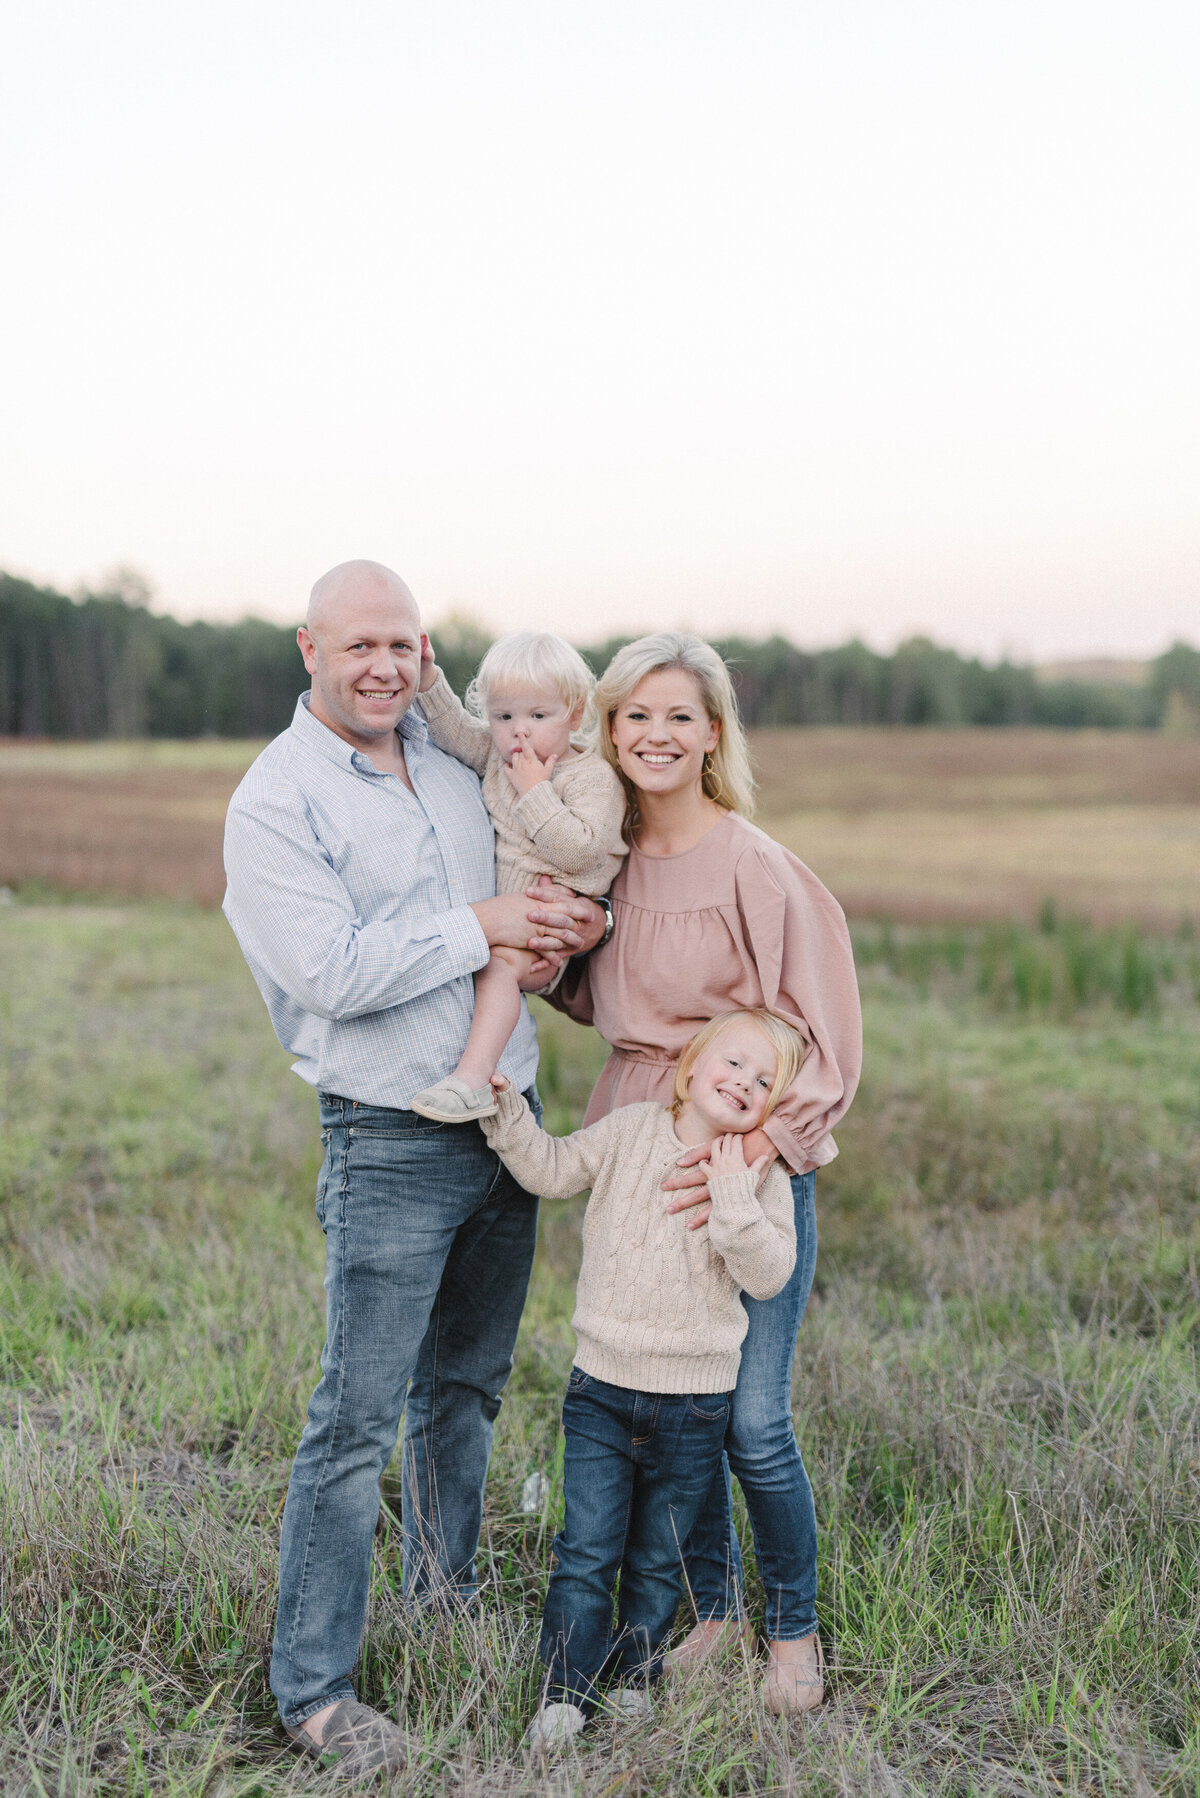 Family portraits in Hoover, AL at Moss Rock Preserve in a field